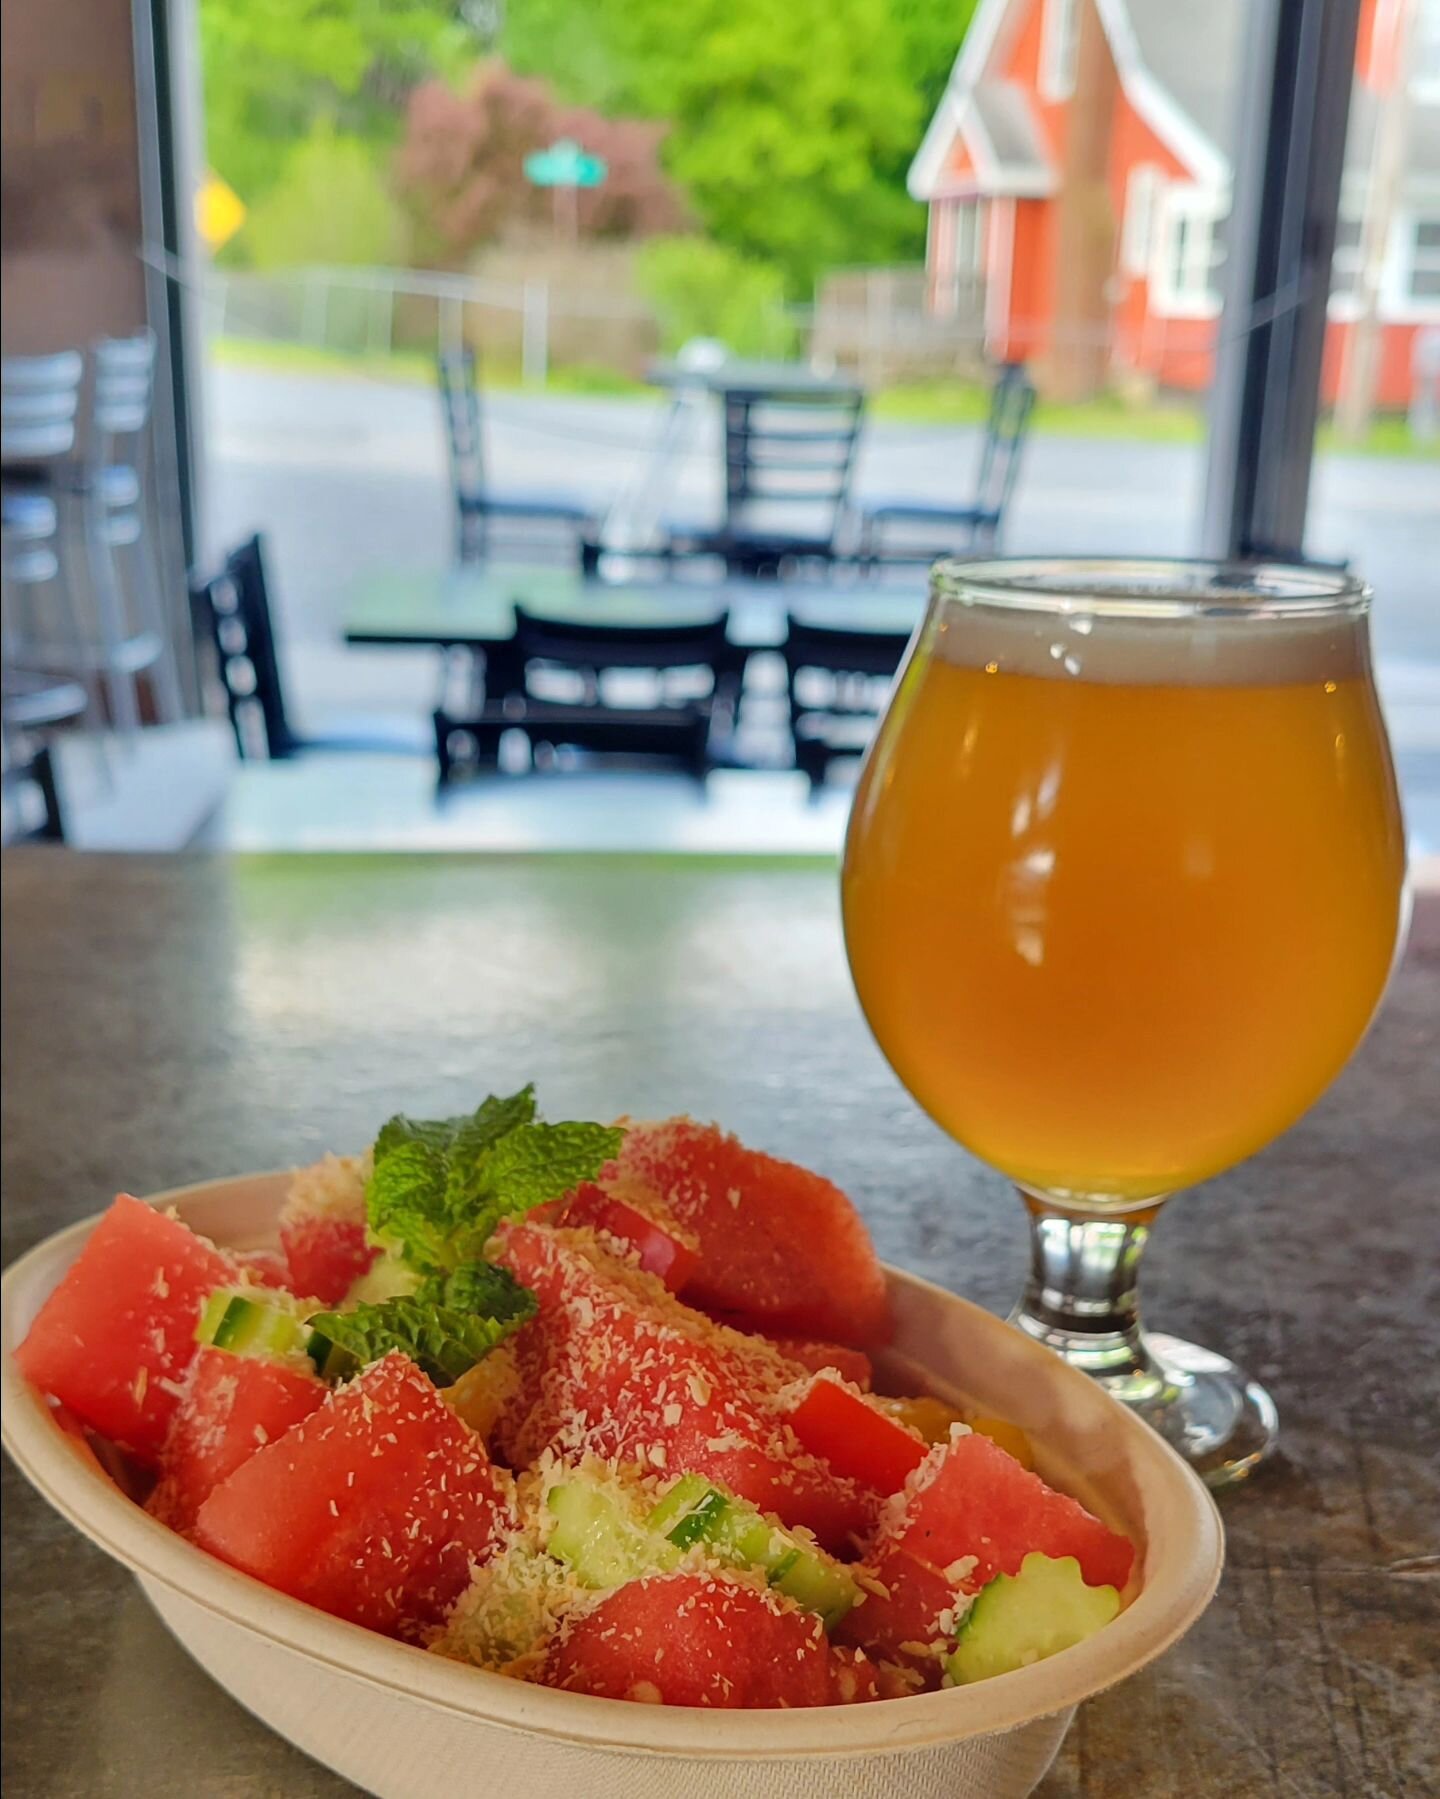 Our new English Summer Ale is on tap!!! English Summer is a super drinkable golden ale with a hint of lemon zest. Delicious and refreshing just like @neenee0819 watermelon salad 🤤.

Come hang out today 12-9pm and see the very fun @goodmorningnags in